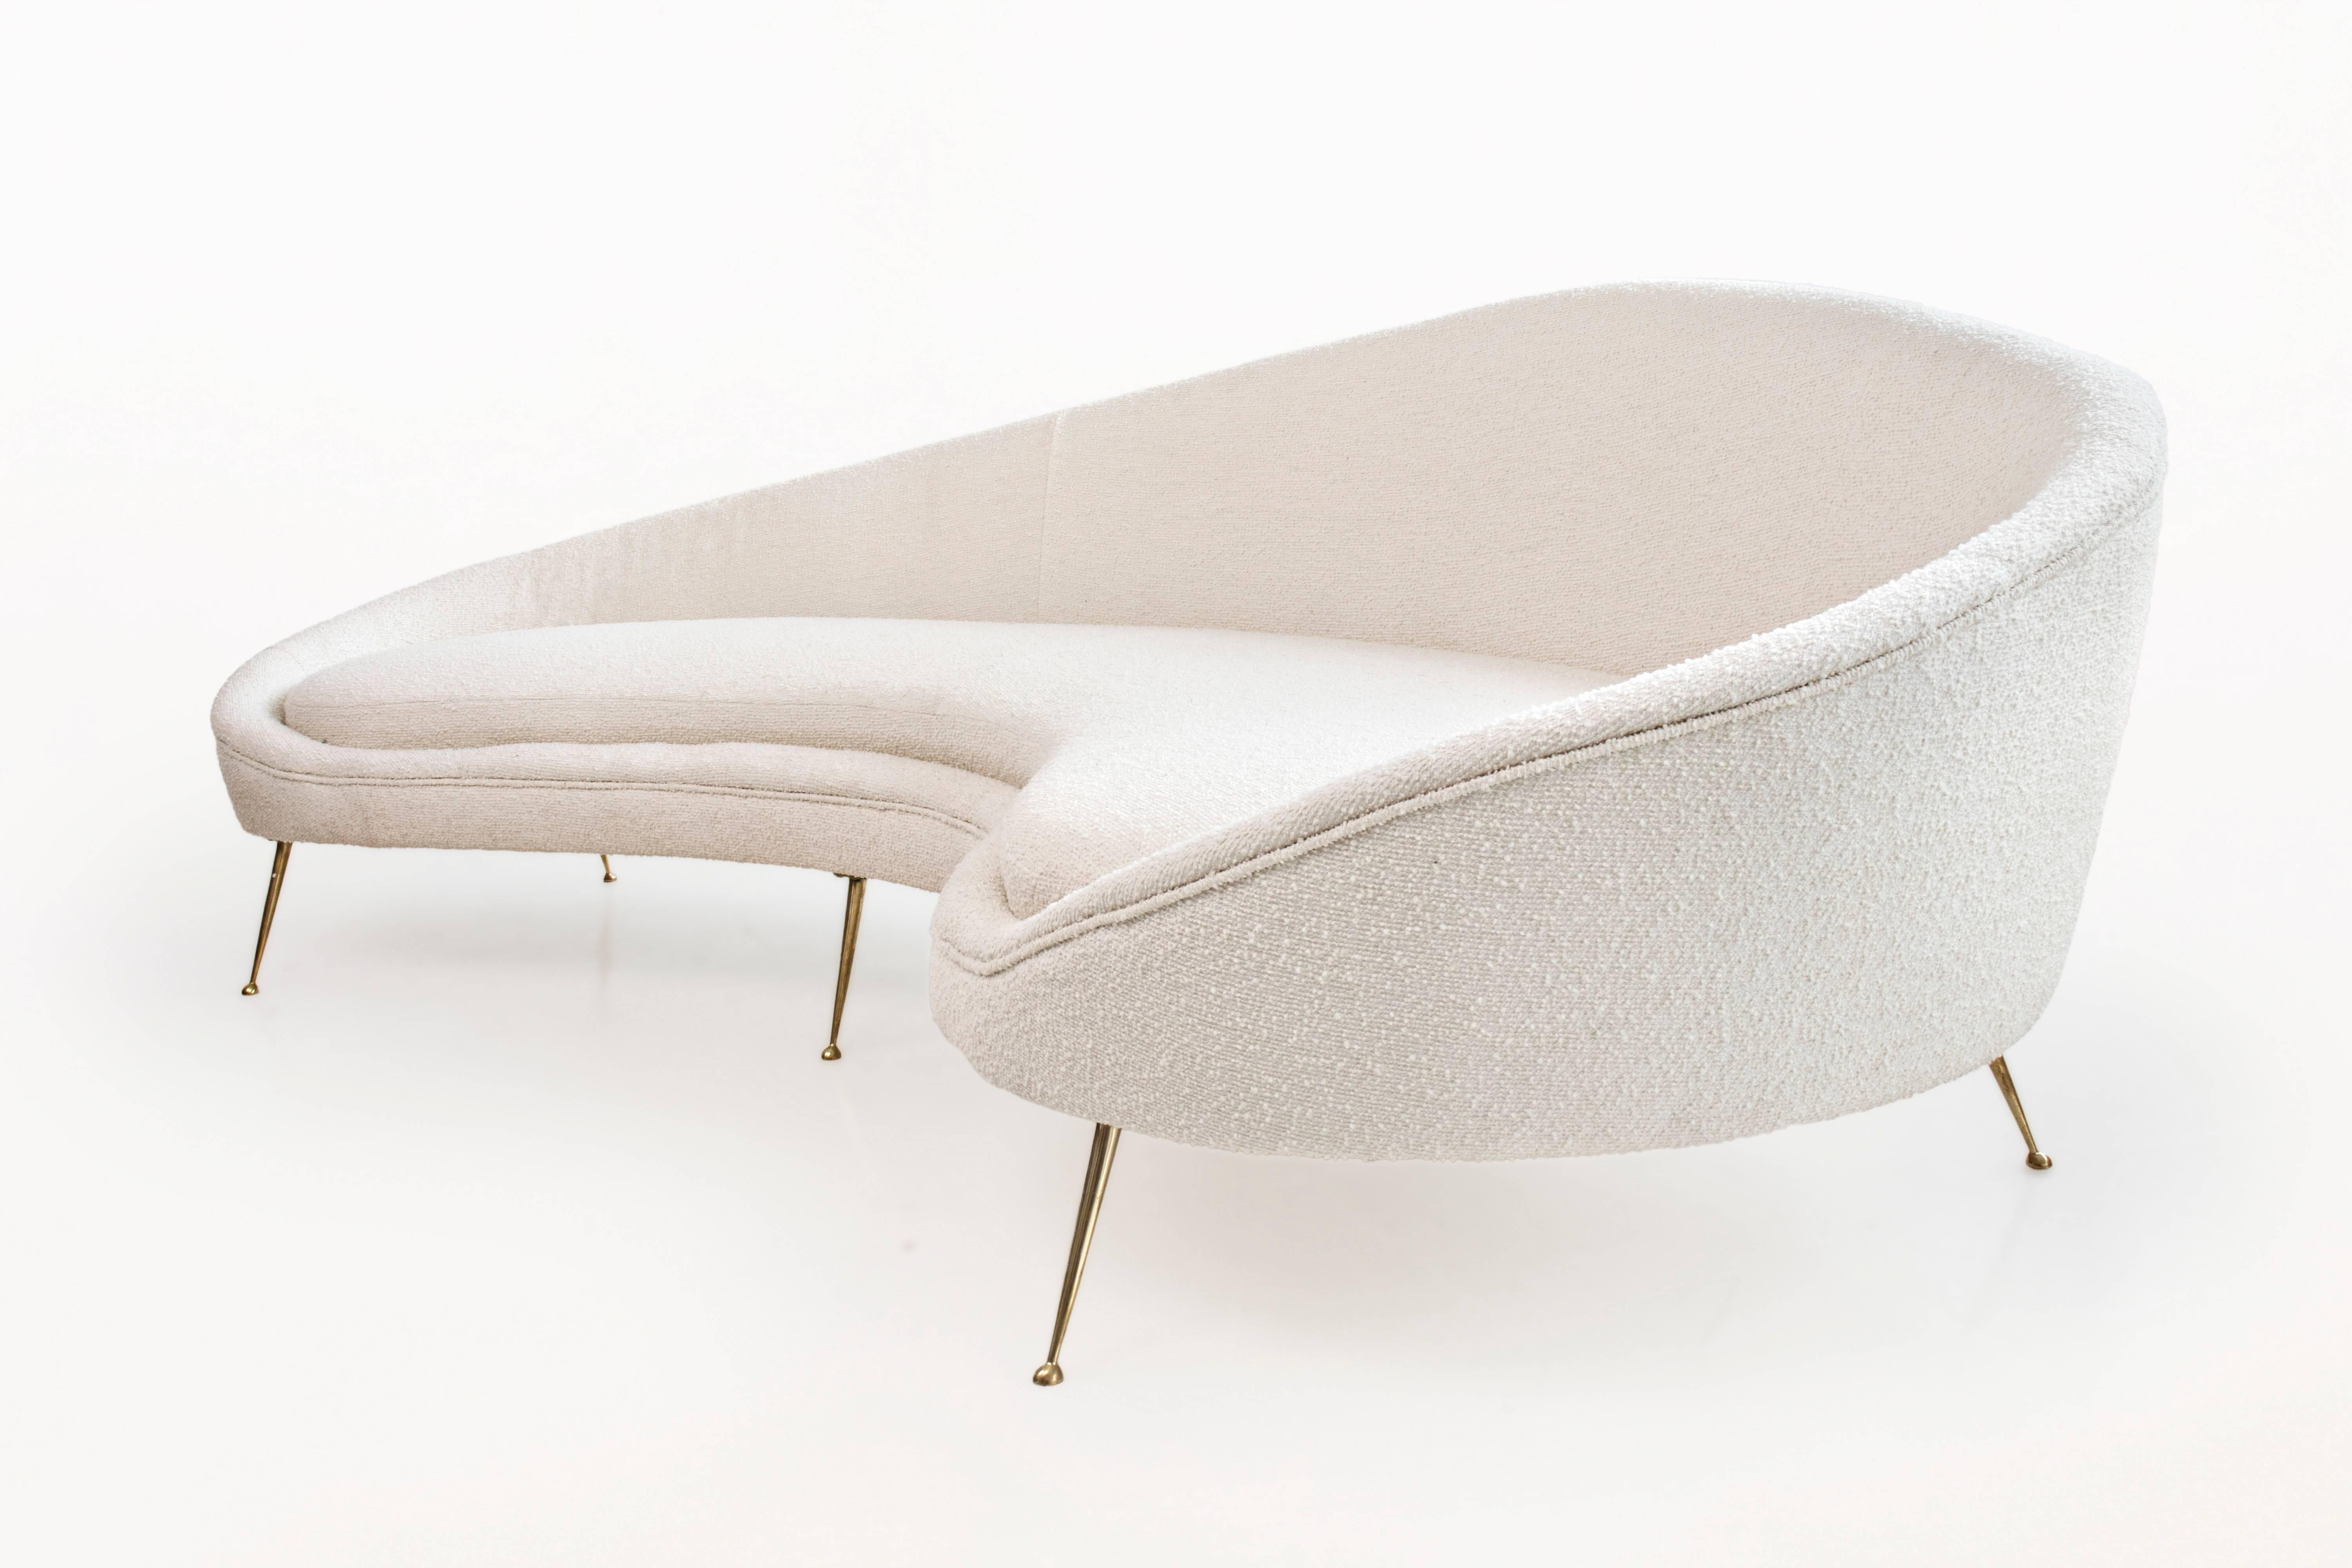 Sofa by Federico Munari
Curved, organic-form
Recently re-upholstered
Brass legs
Iconic midcentury elegance,
circa 1950, Italy.
Very good vintage condition.